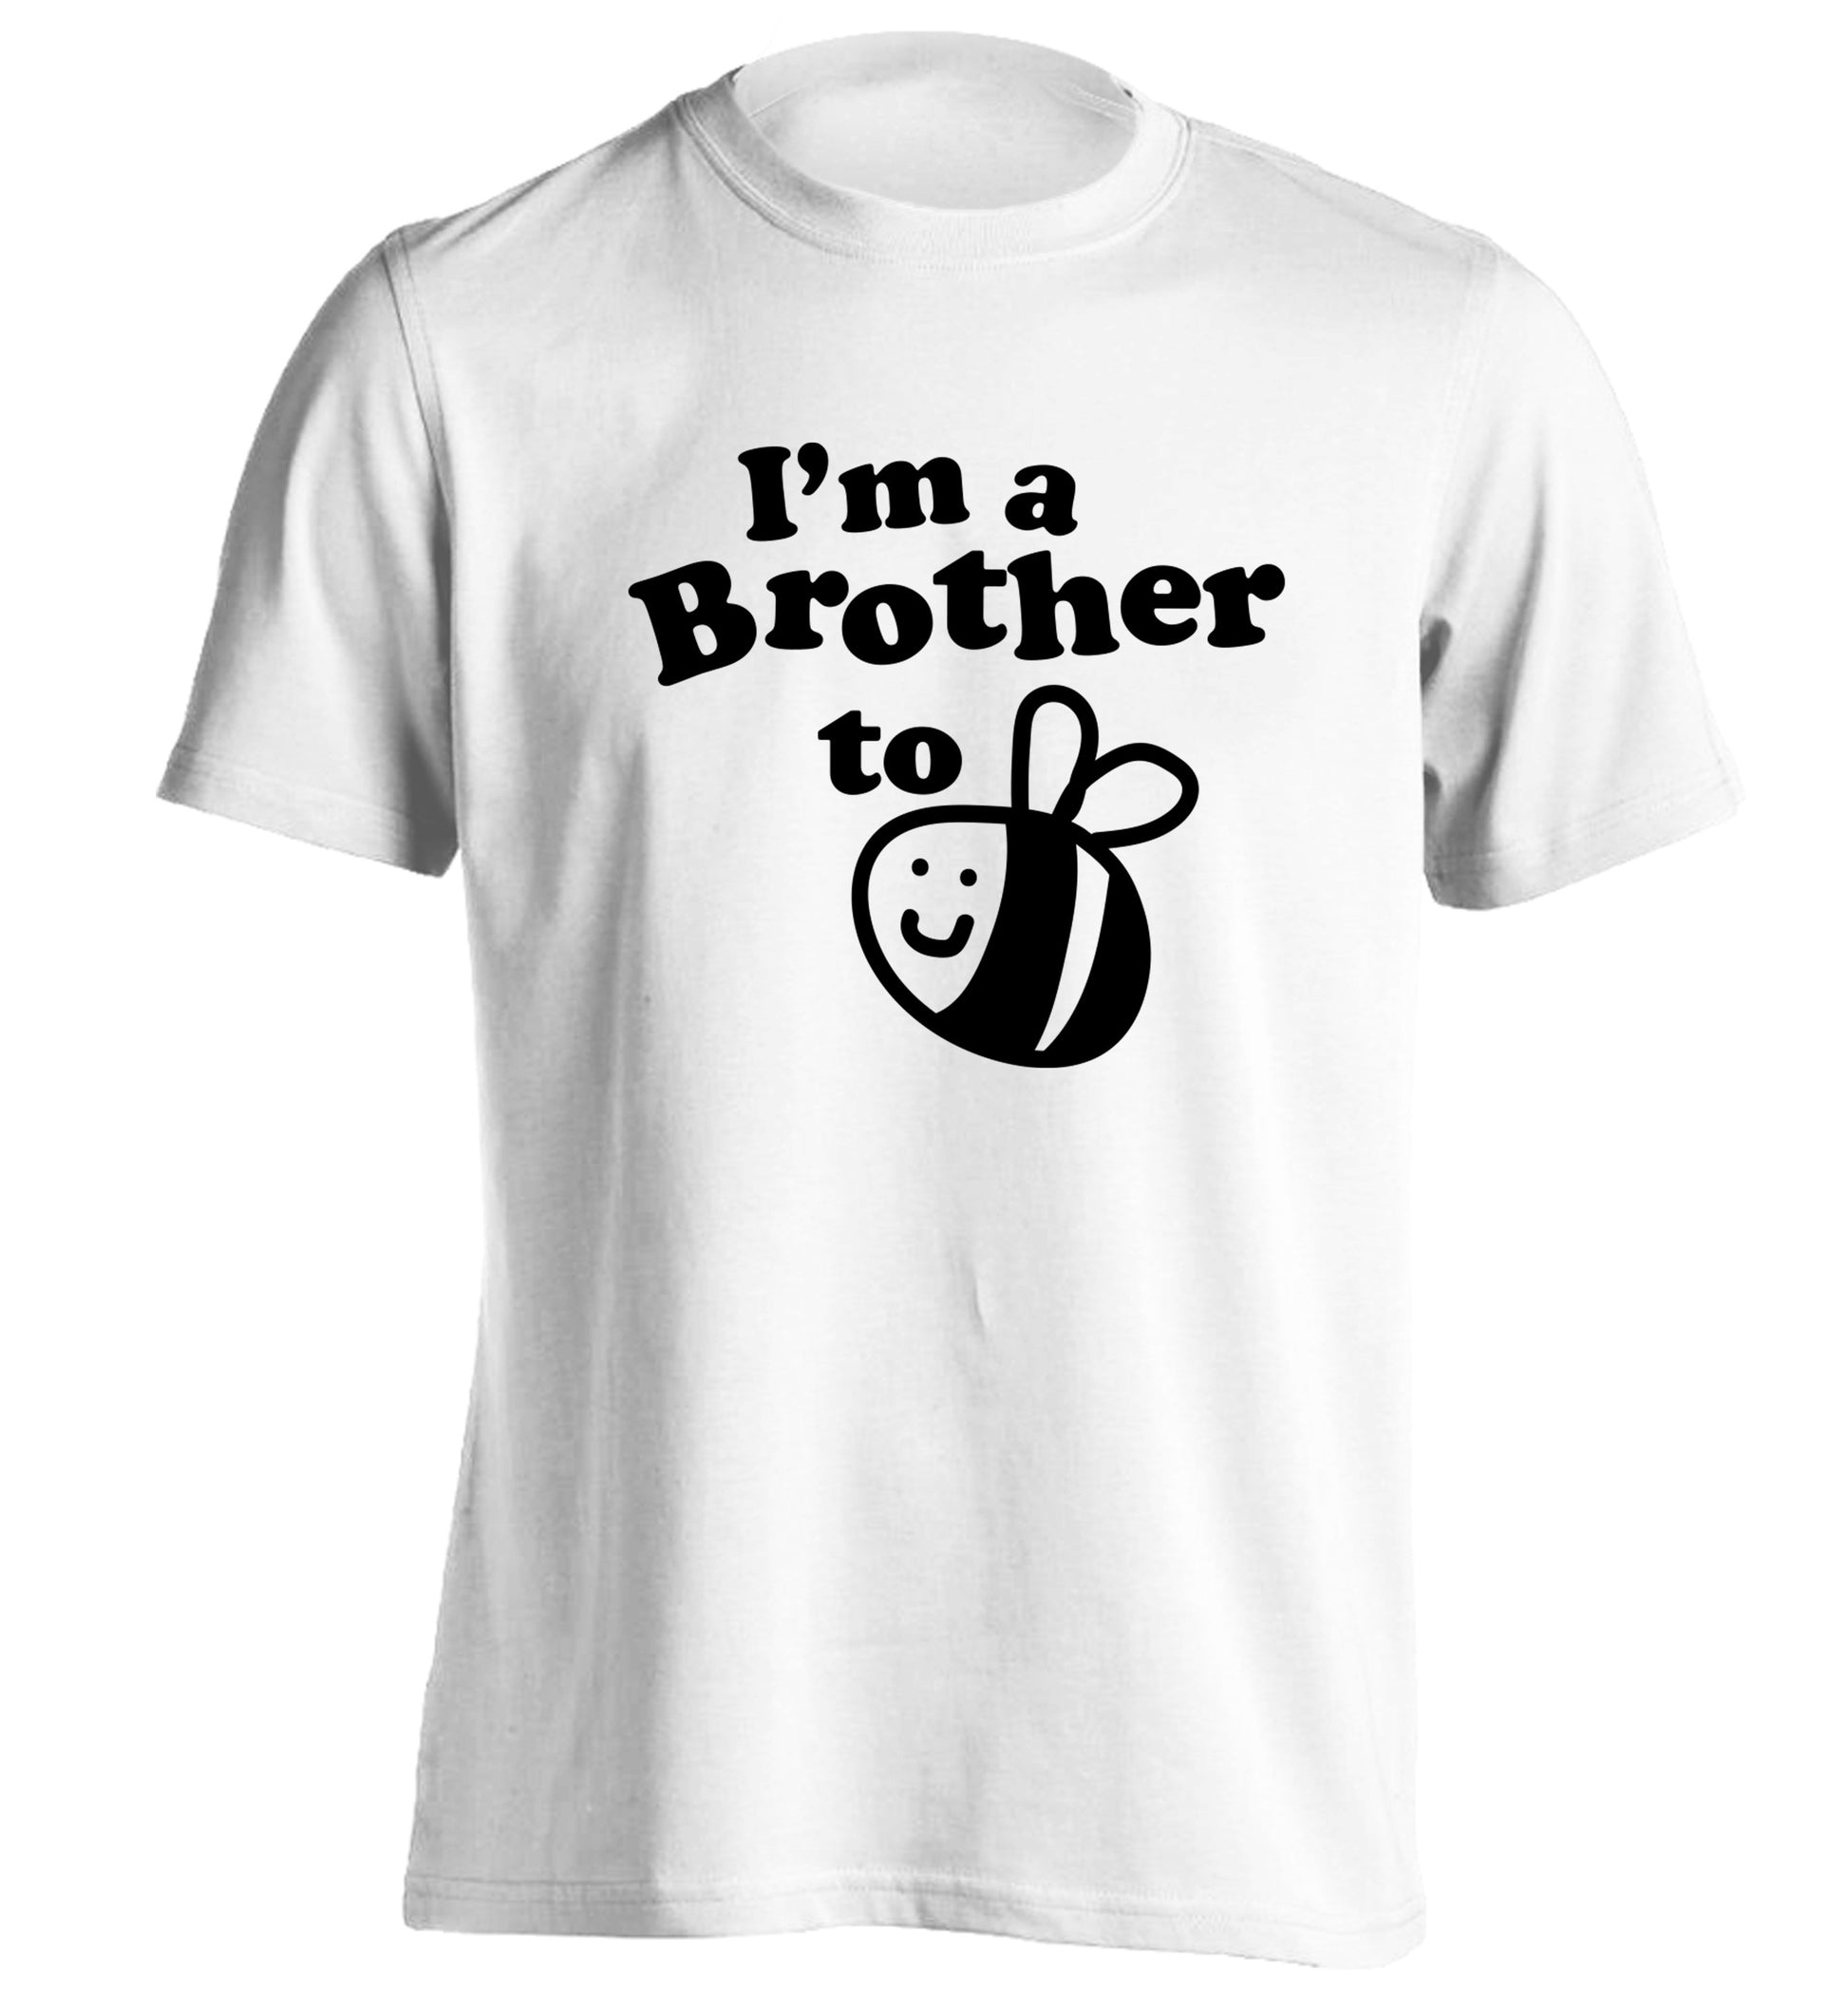 I'm a brother to be adults unisex white Tshirt 2XL